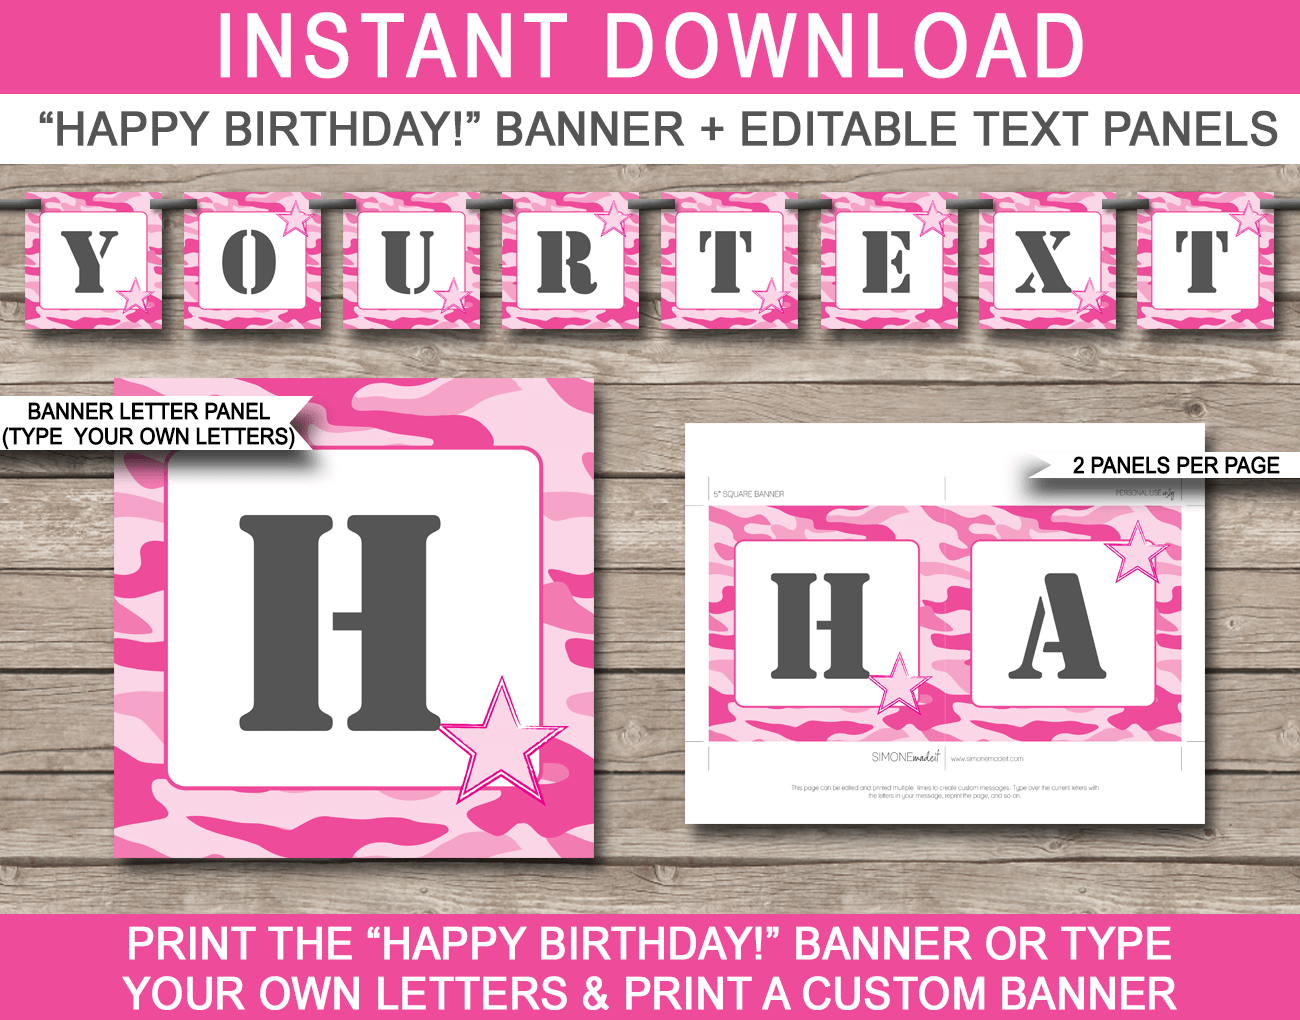 Pink Camo Banner Template - Pink Camo Bunting - Happy Birthday Banner - Birthday Party - Editable and Printable DIY Template - INSTANT DOWNLOAD $4.50 via simonemadeit.com